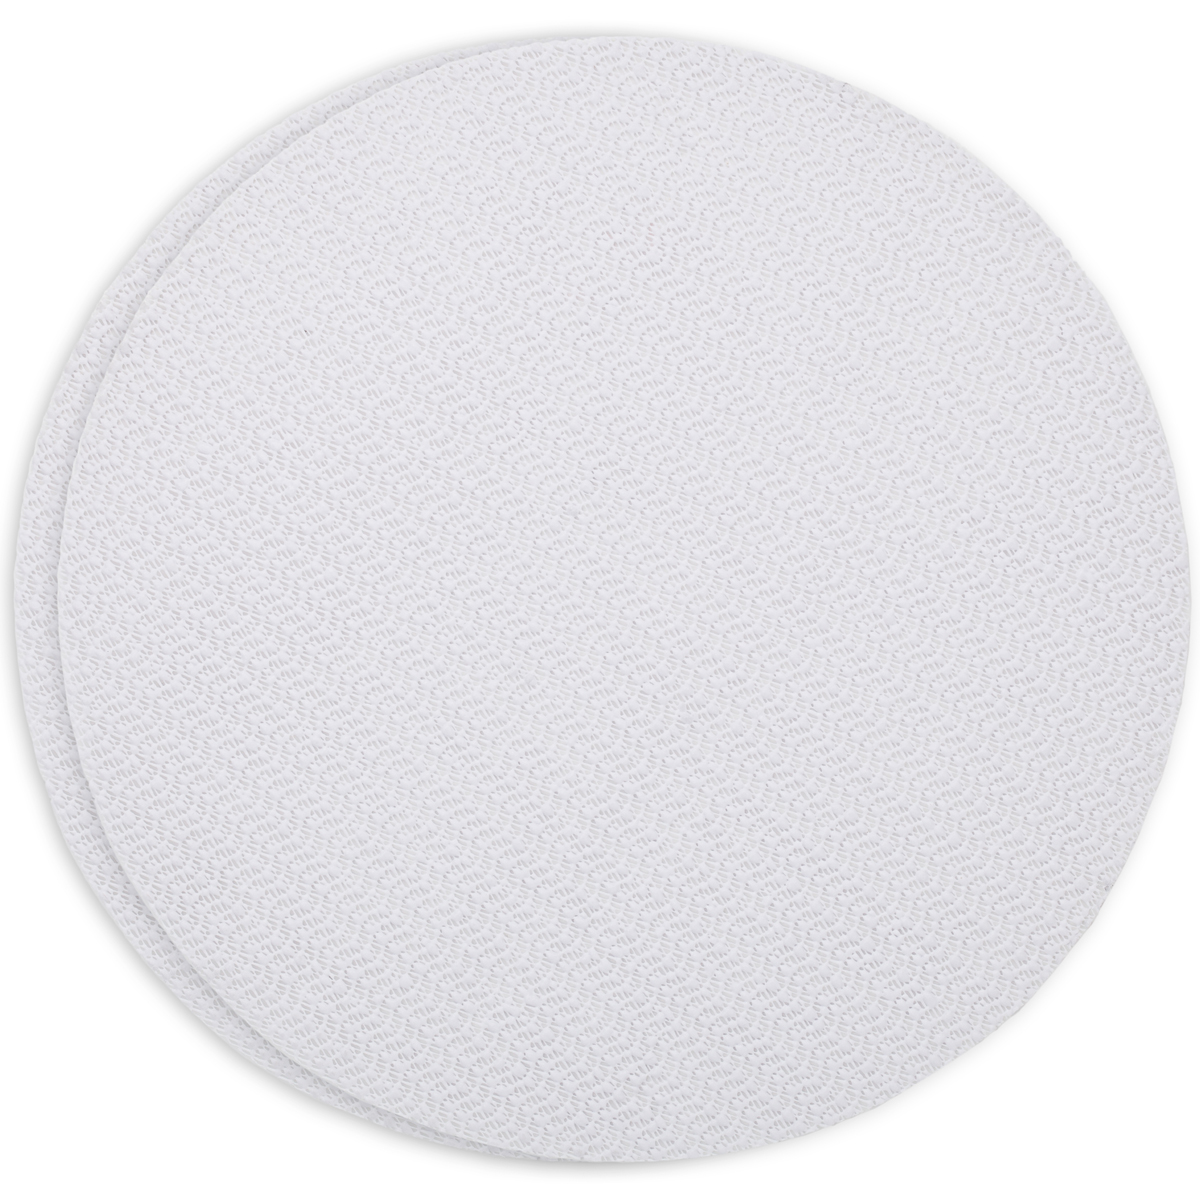 Ateco 12" Non-Slip Cake Stand Pads - Pack of 2